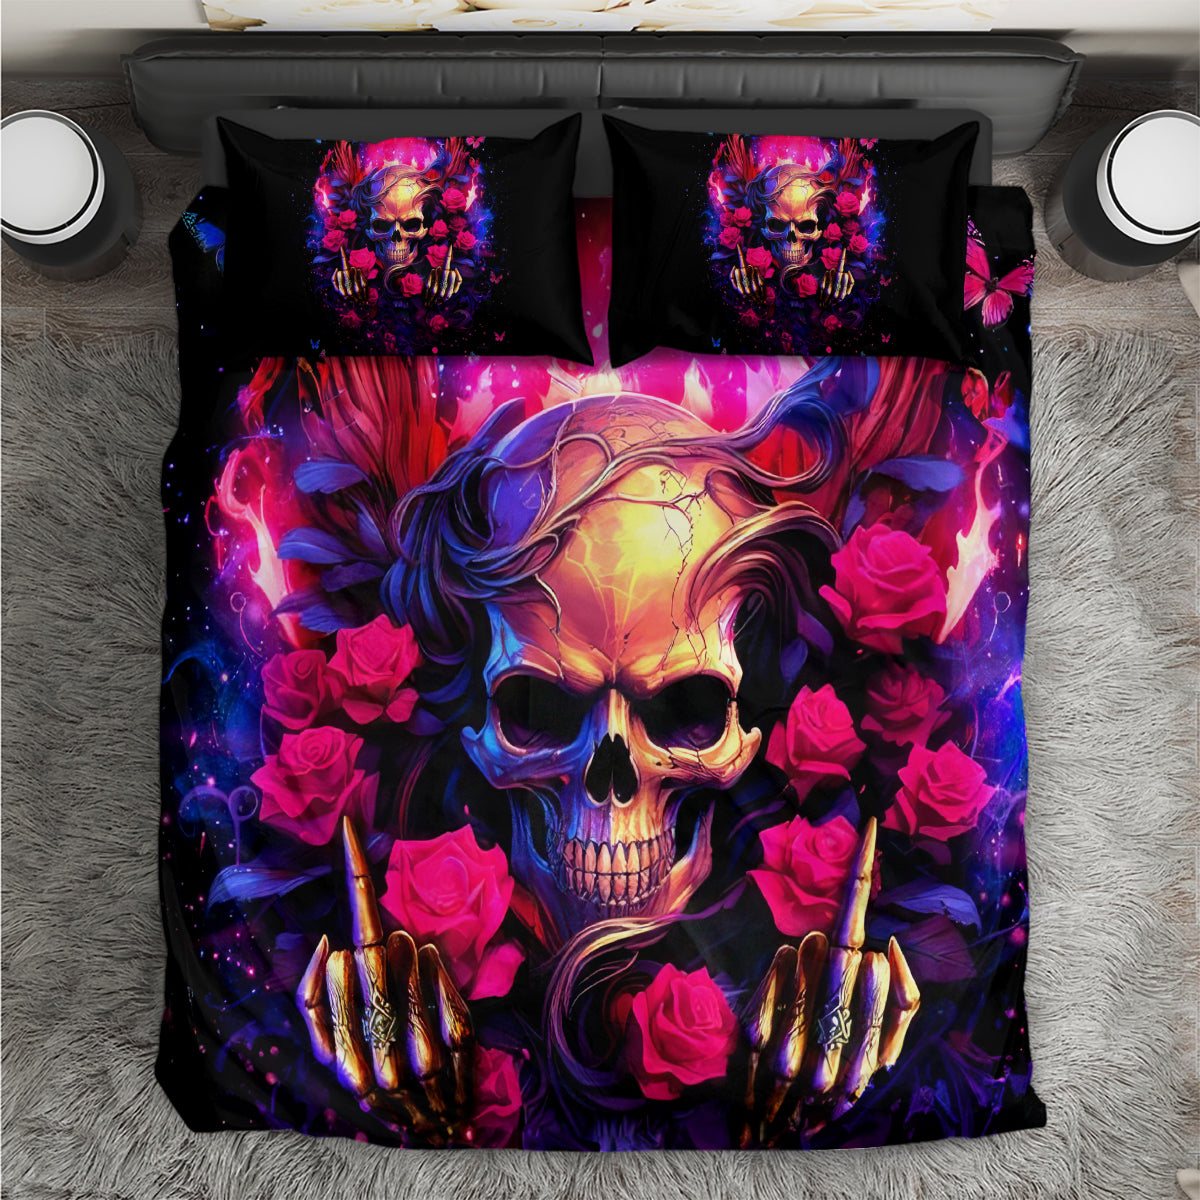 Rose Skull Bedding Set No Matter How Much I Try To Be Fucking Nice